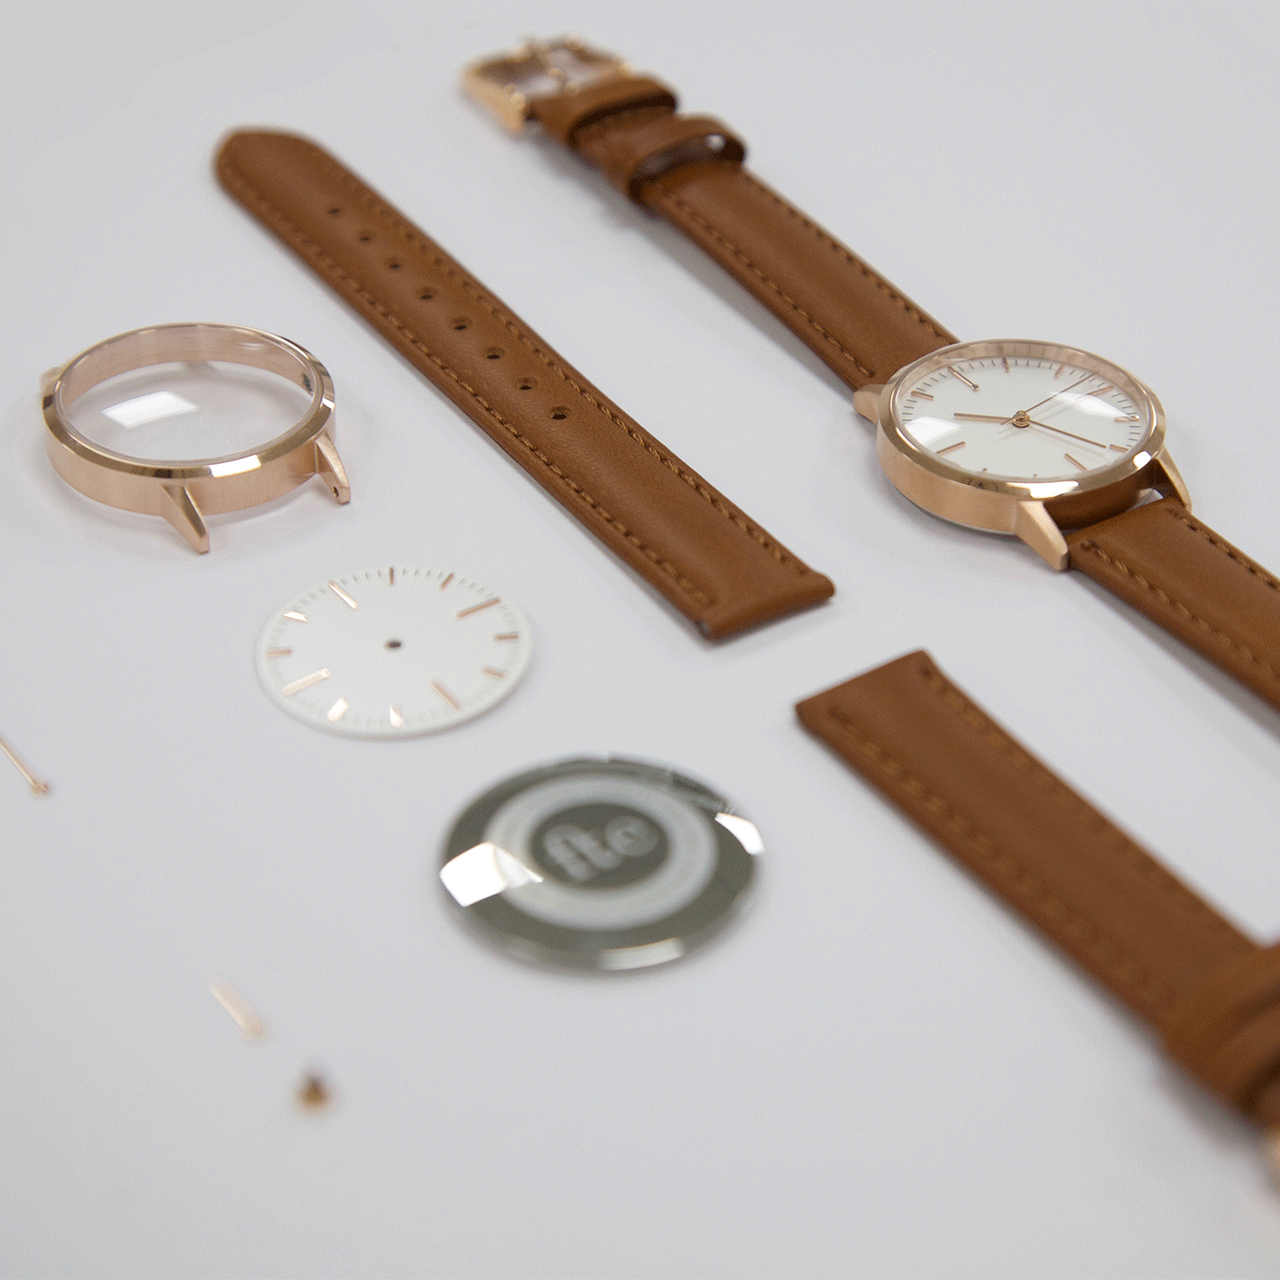 Kirsty Whyte and Paul Tanner Create Timepieces in Their Spare Time as Freedom to Exist